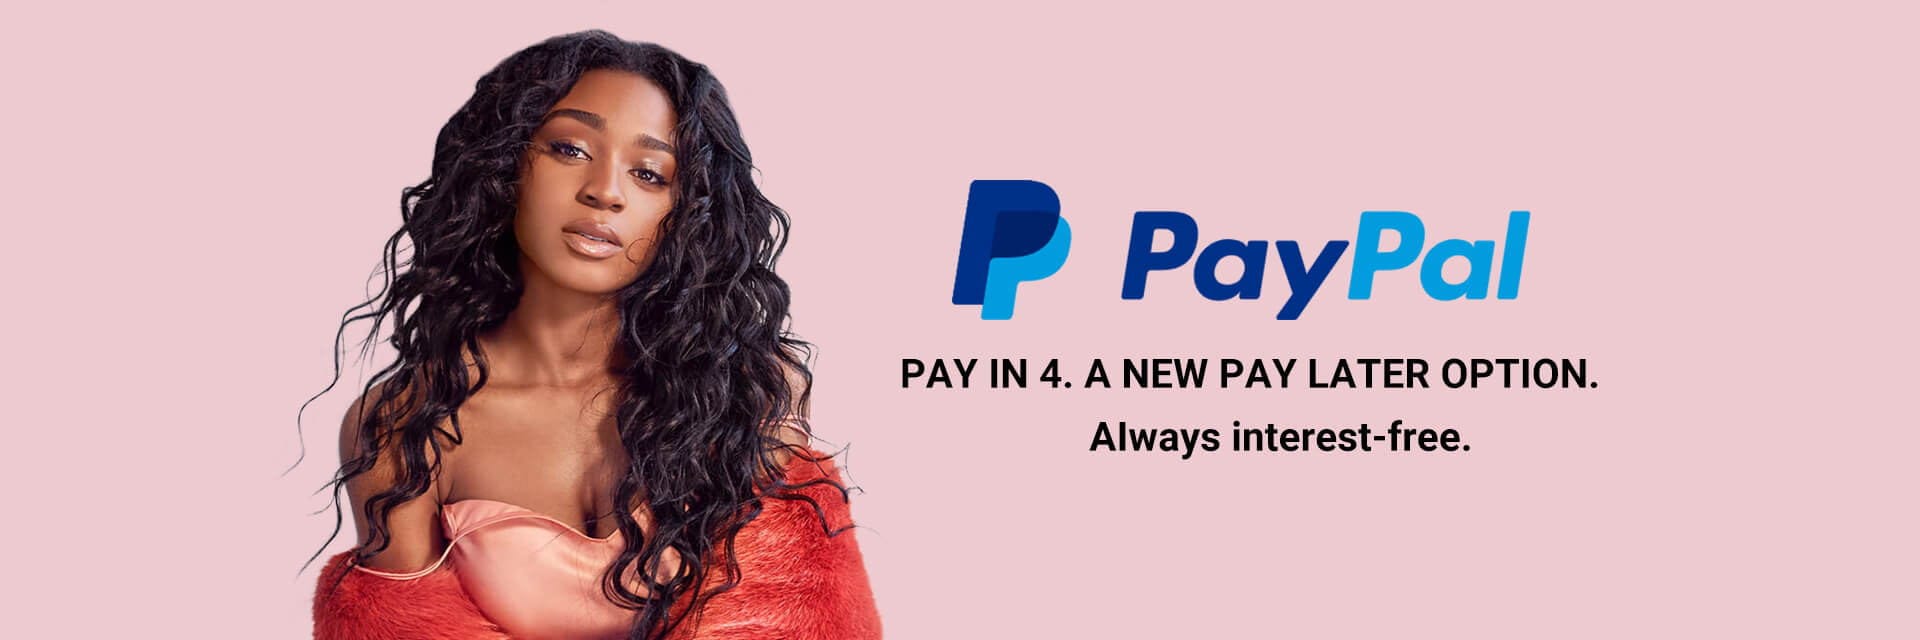 Paypal - Pay Later